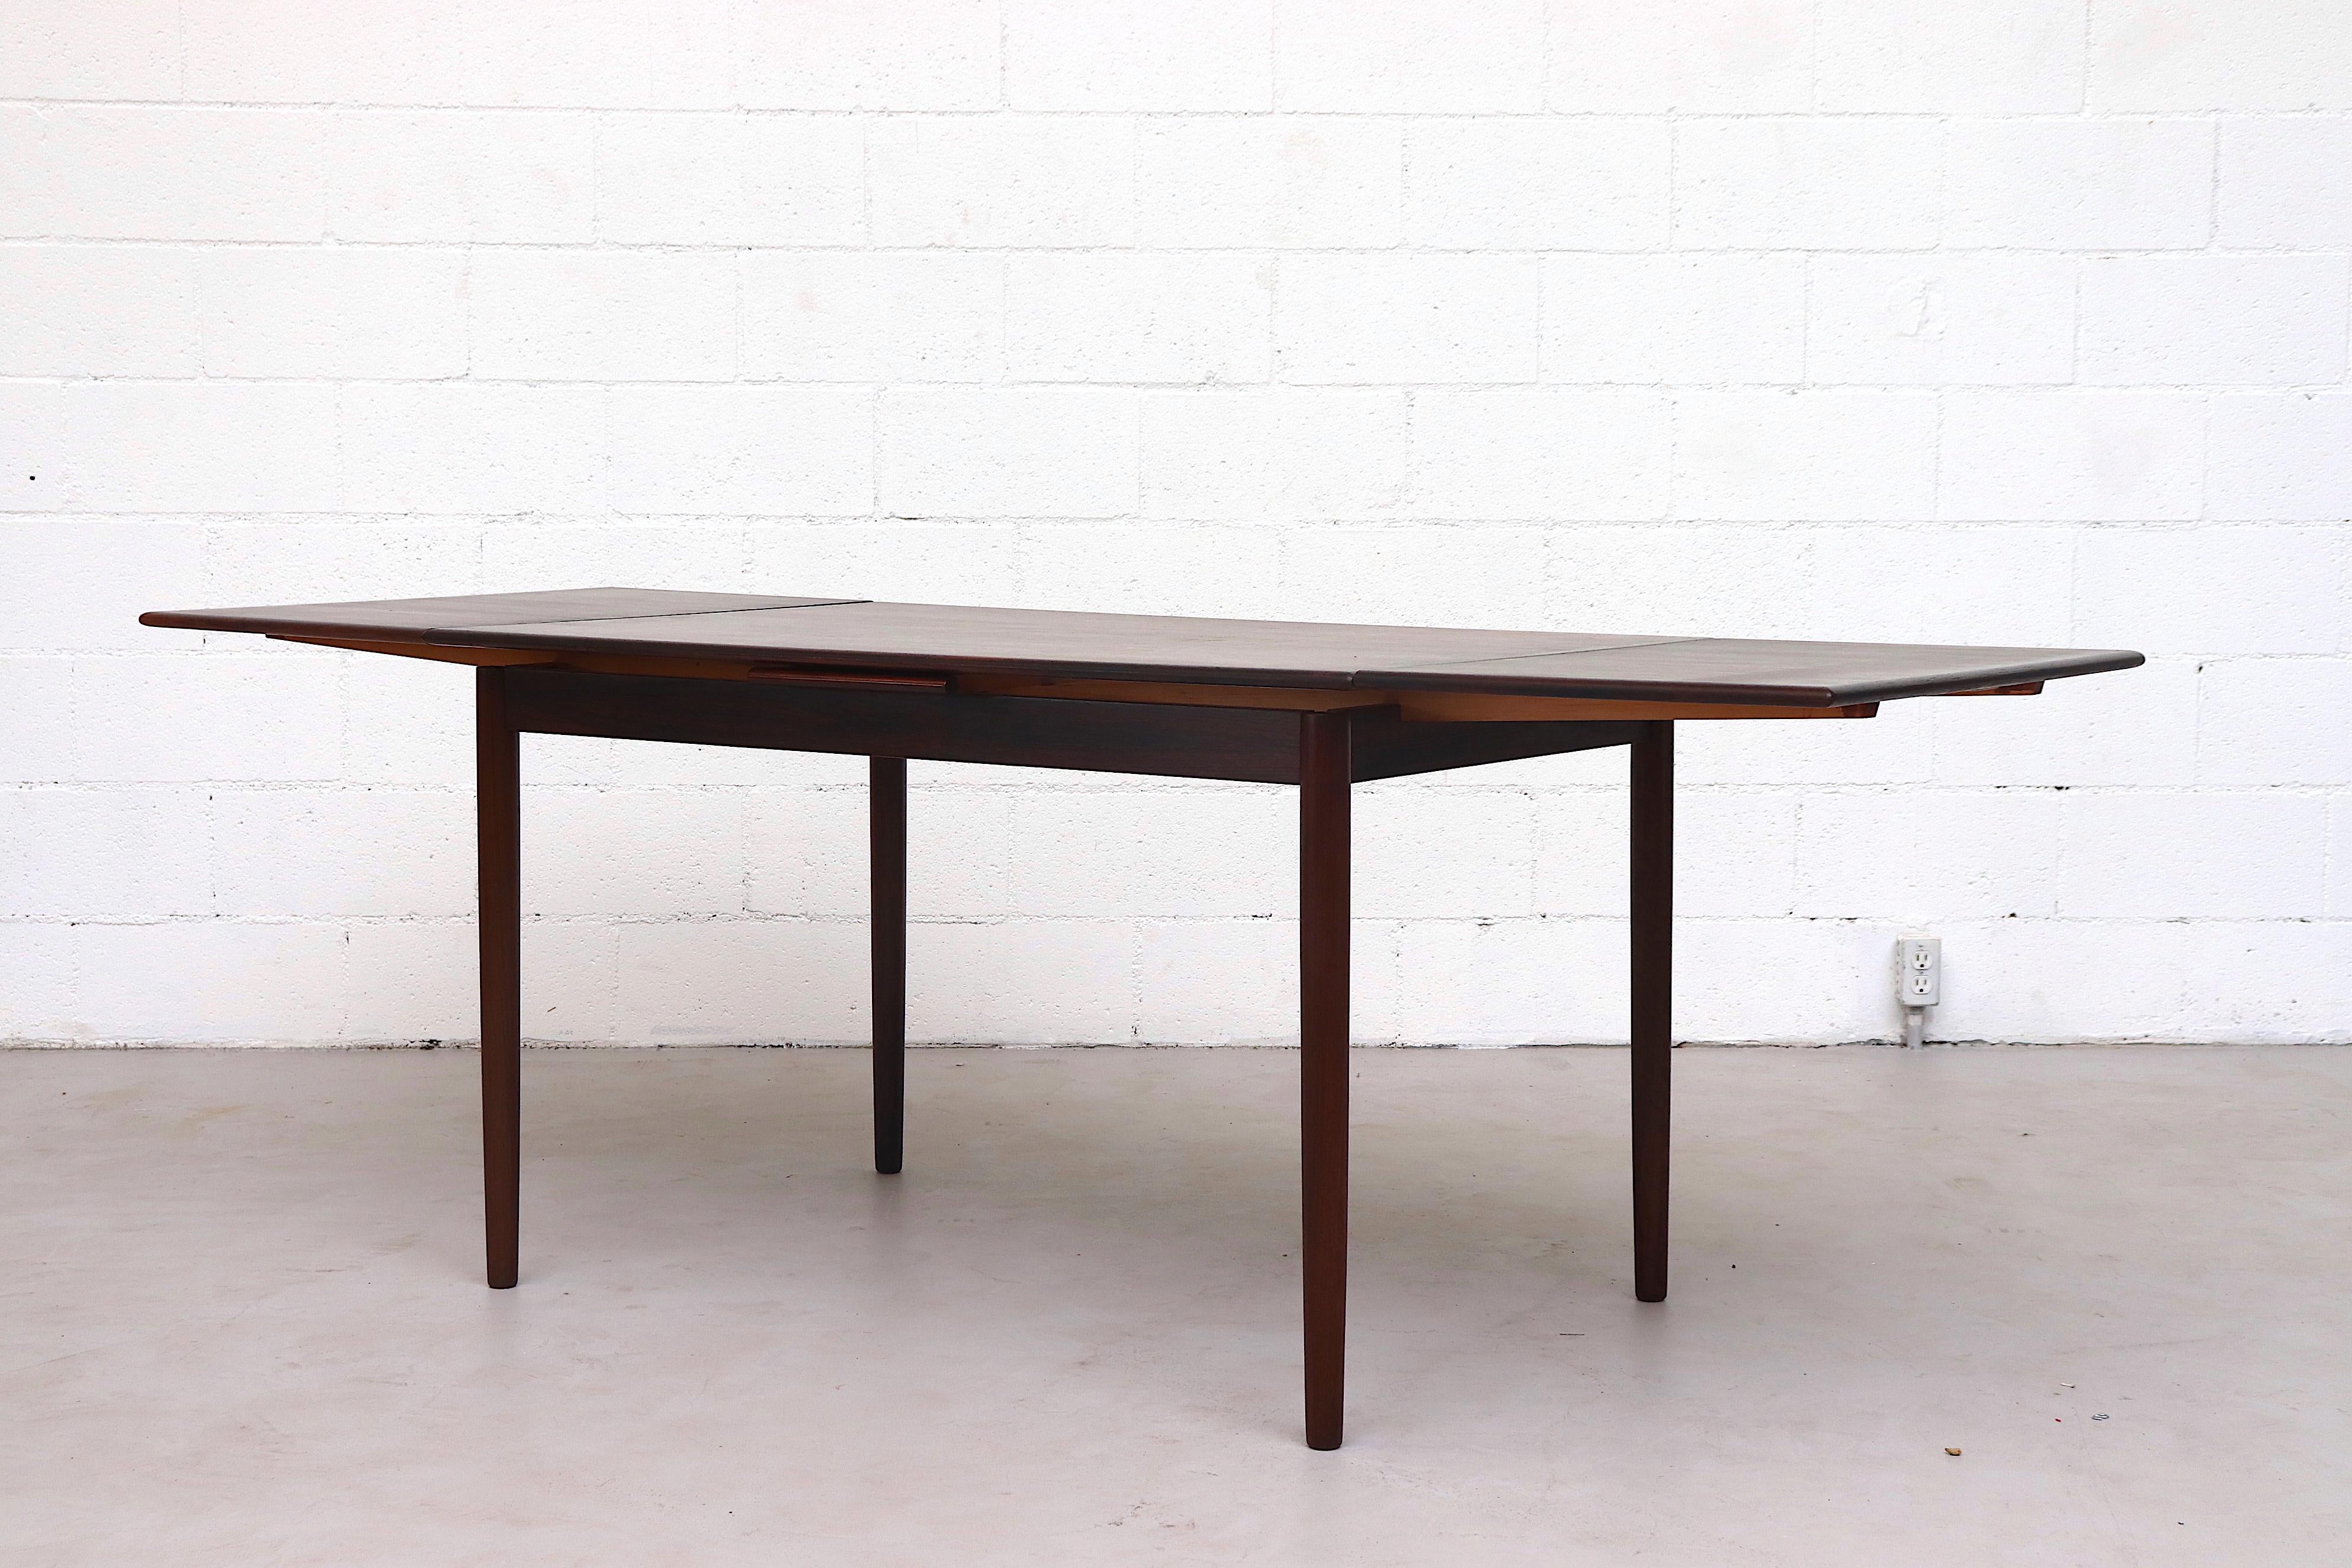 Late 20th Century Midcentury Danish Rosewood Dining Table with Leaves